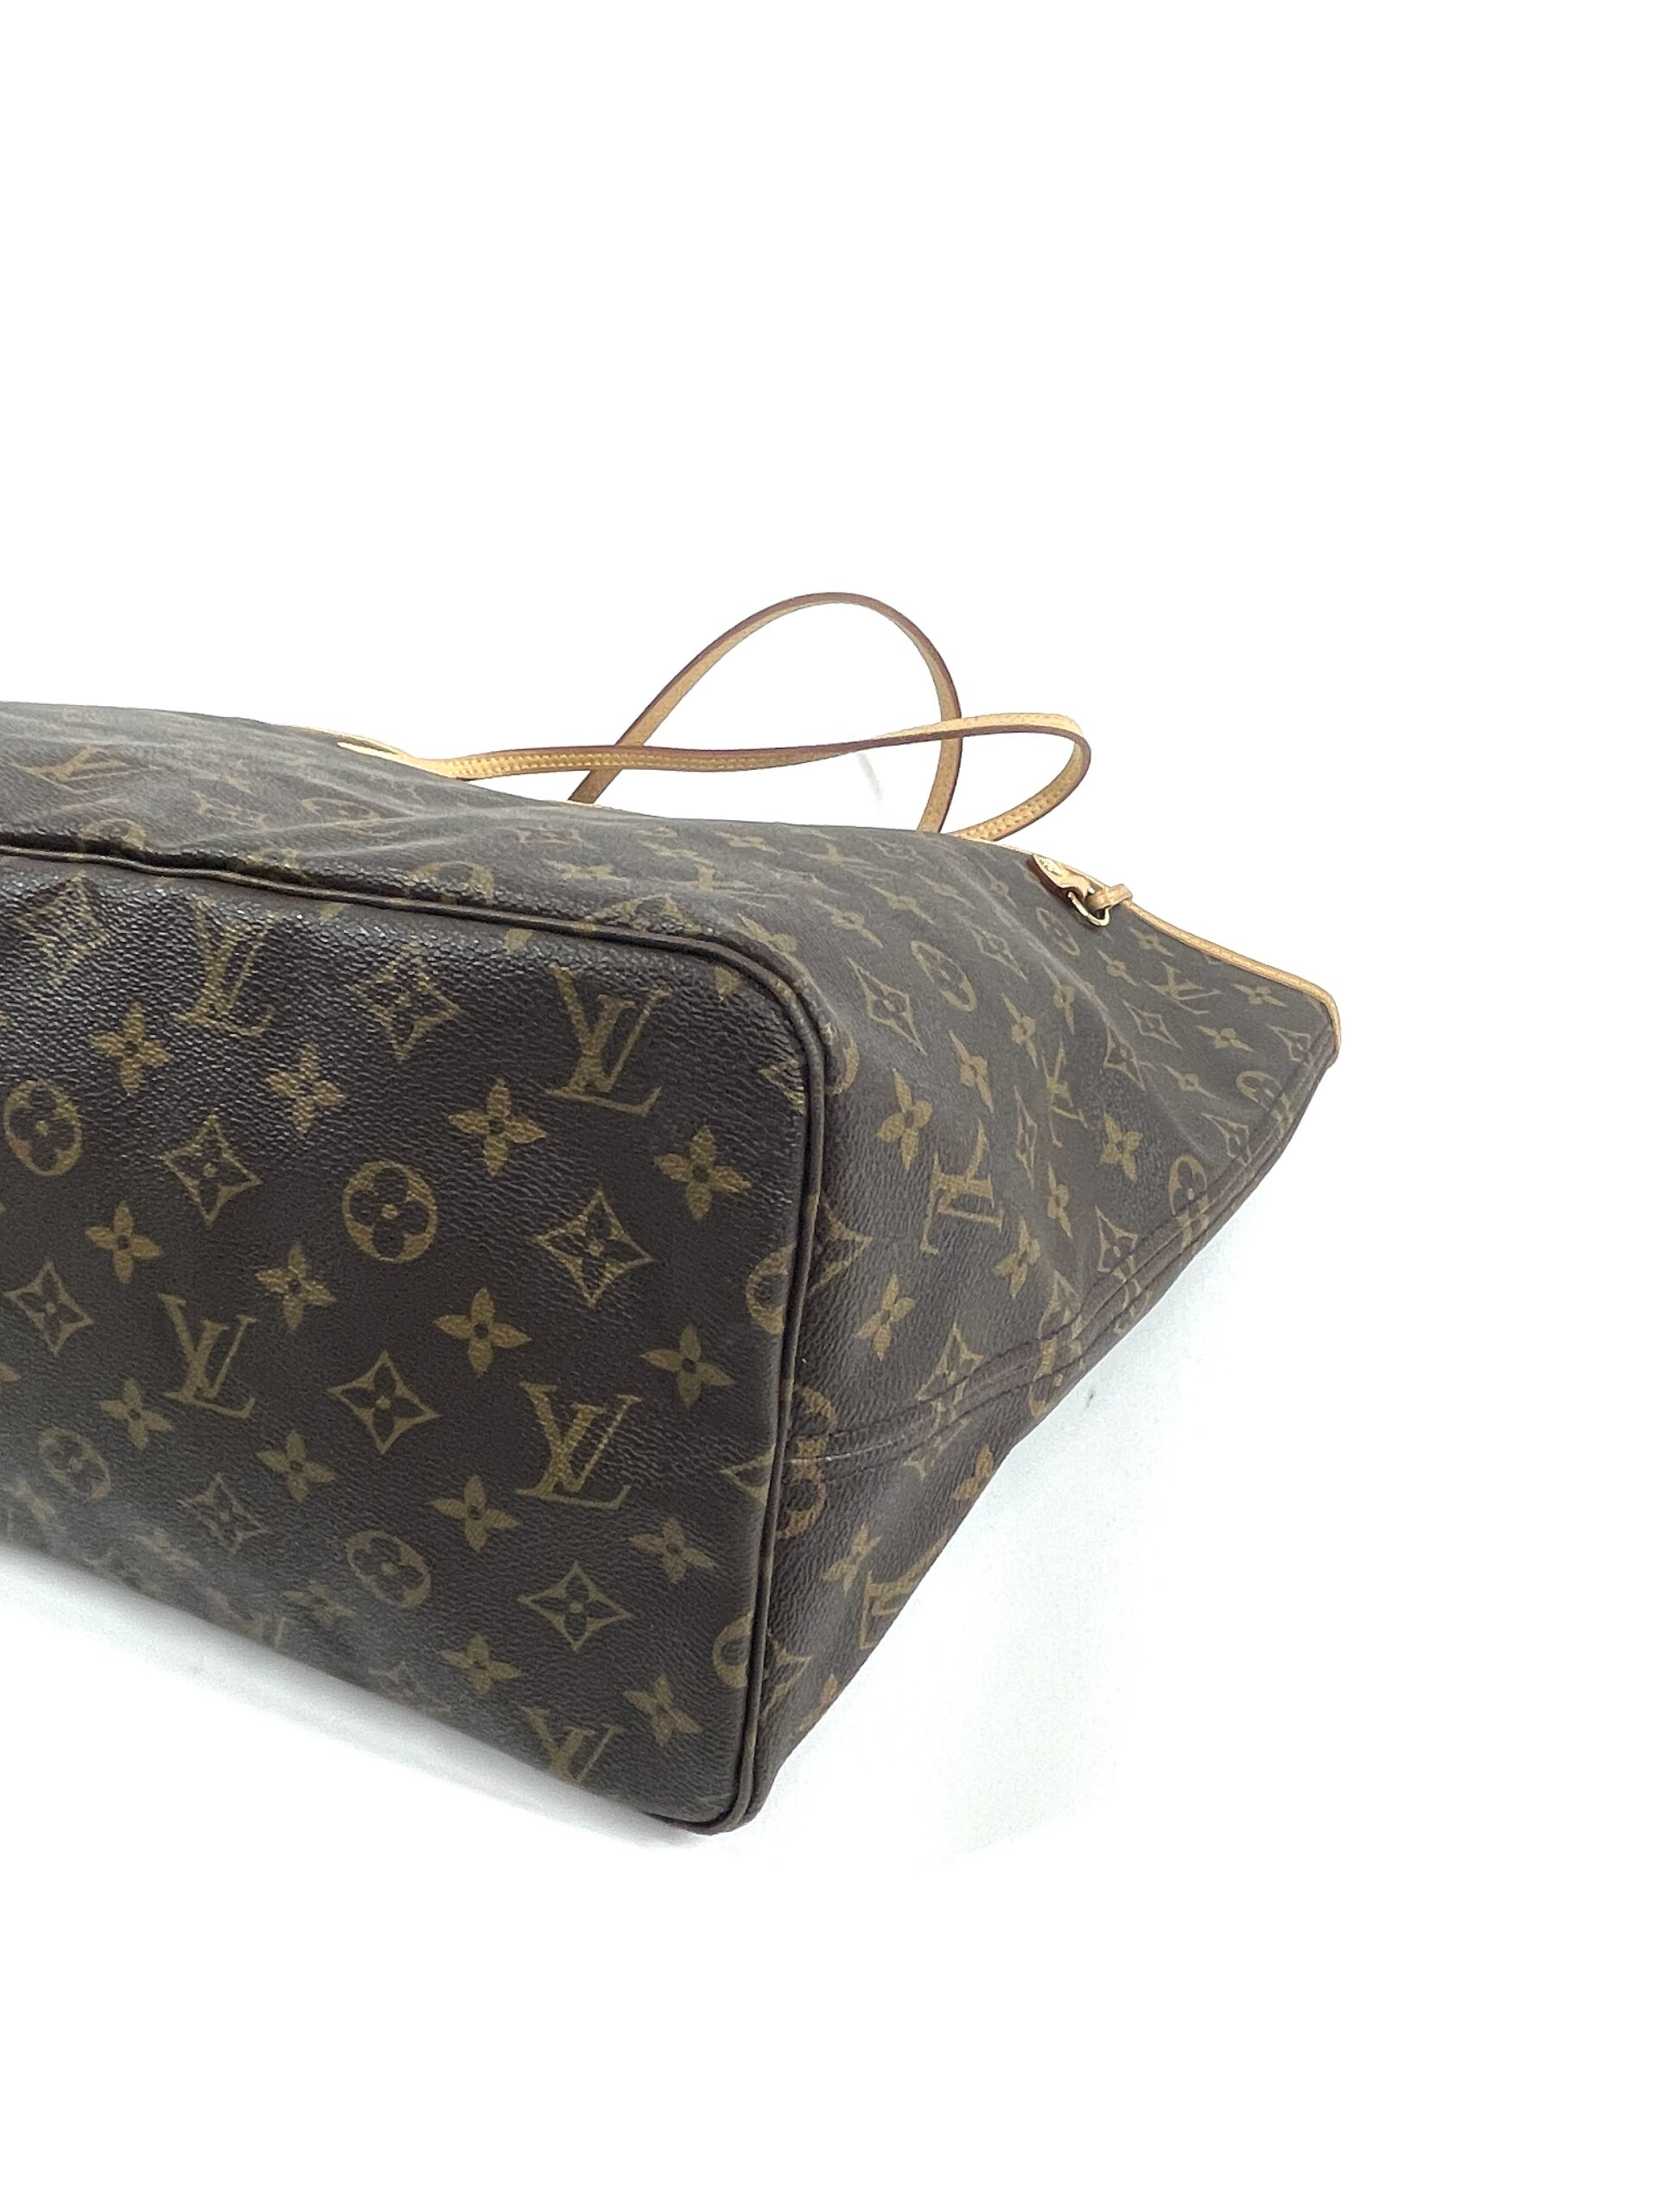 LOUIS VUITTON Neverfull GM Tote bag M40157｜Product Code